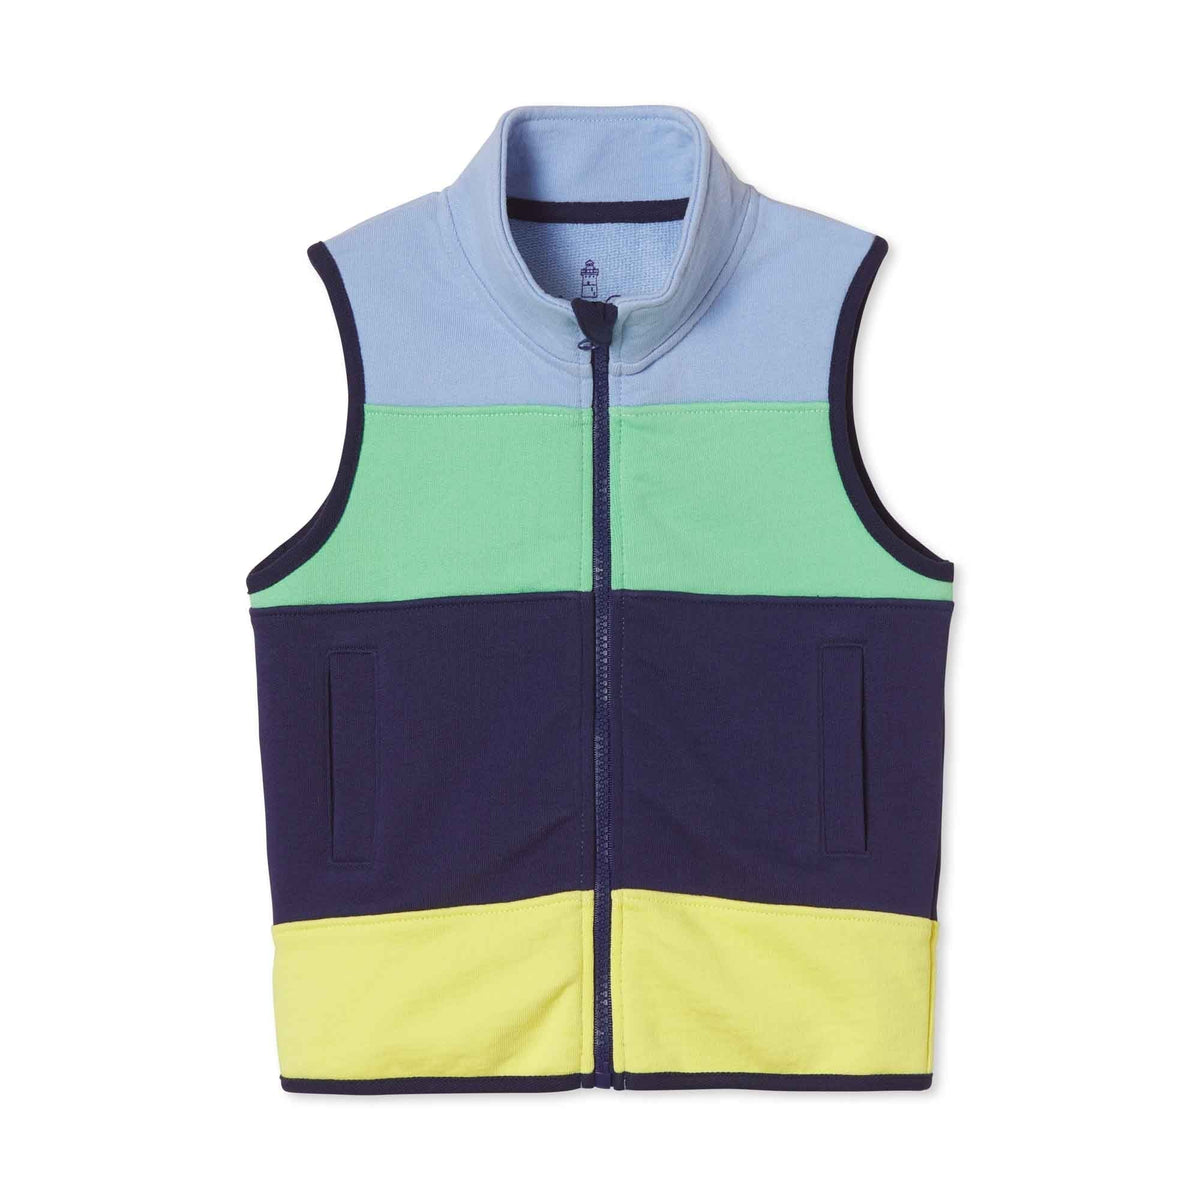 Classic and Preppy Austin Vest, Open Air French Terry-Outerwear-Open Air-XS (2-3T)-CPC - Classic Prep Childrenswear